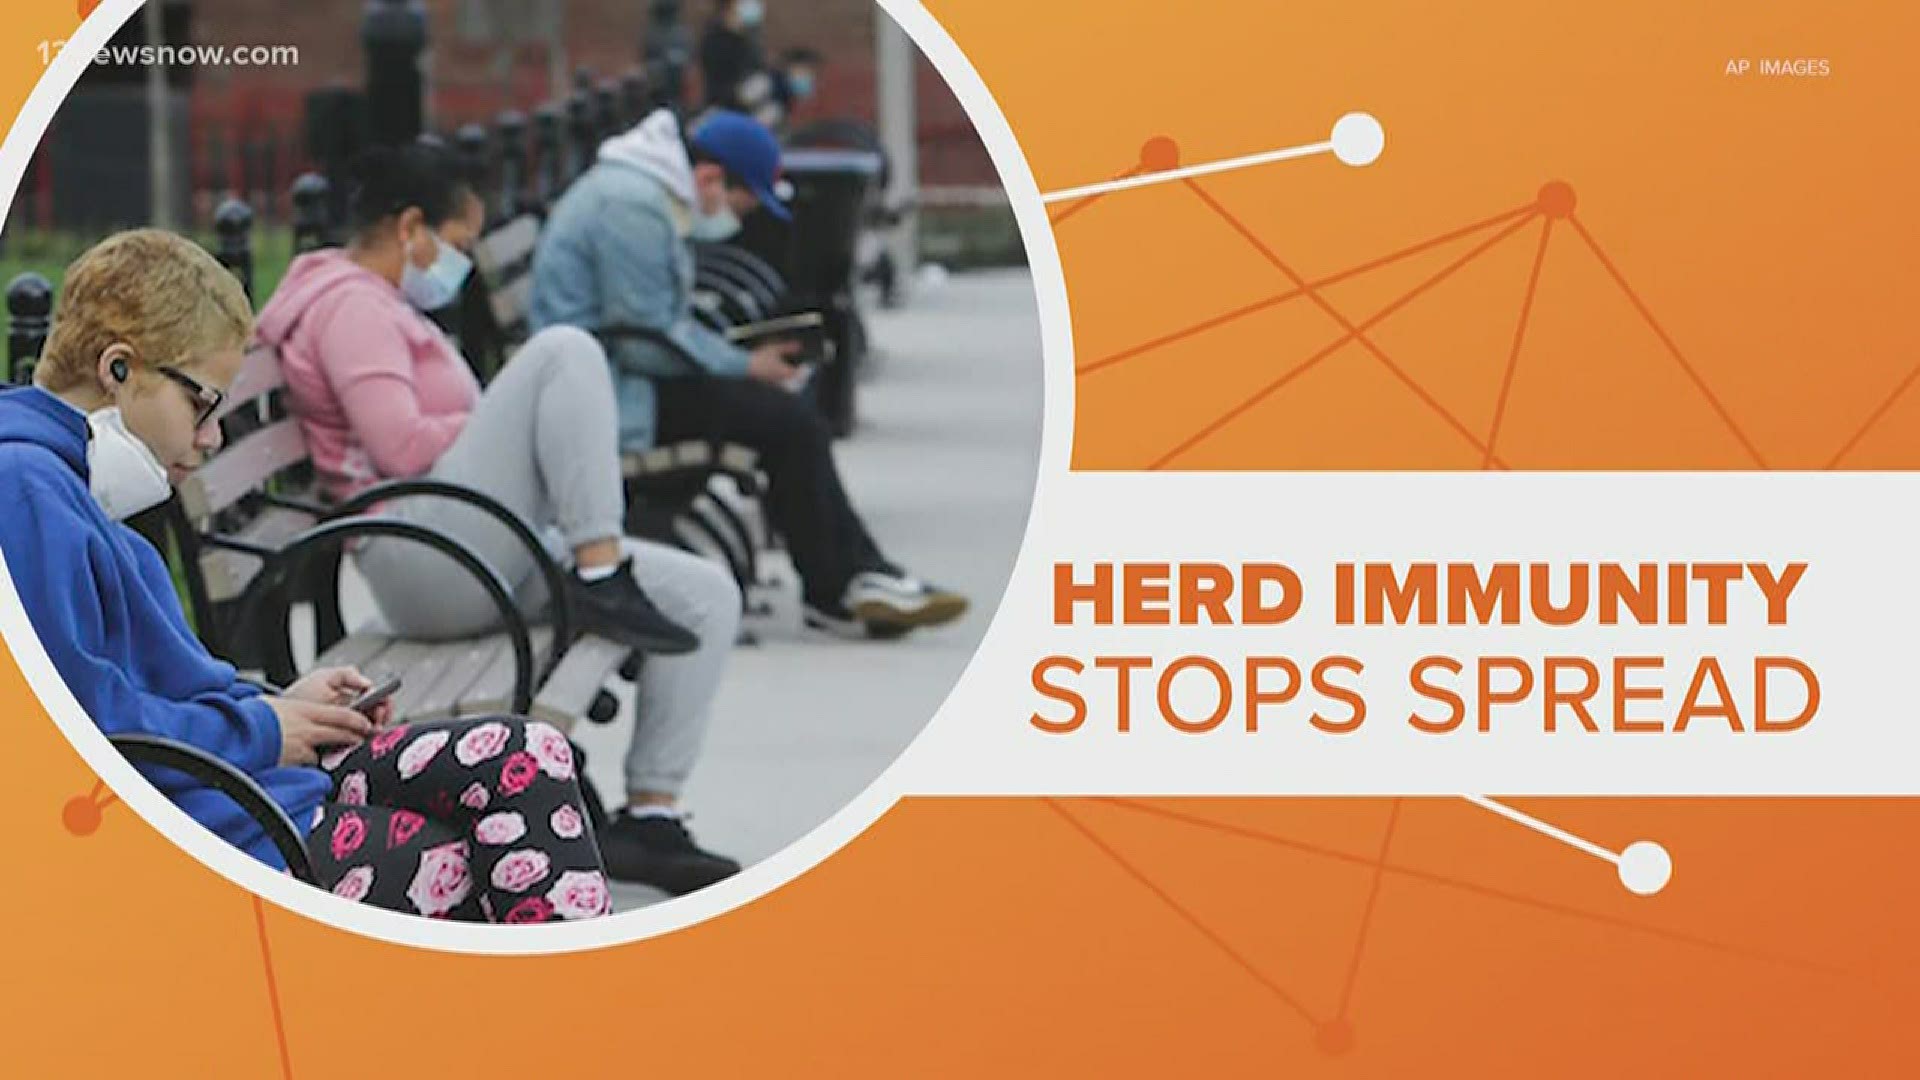 Herd immunity is a complicated goal - especially for this new virus.